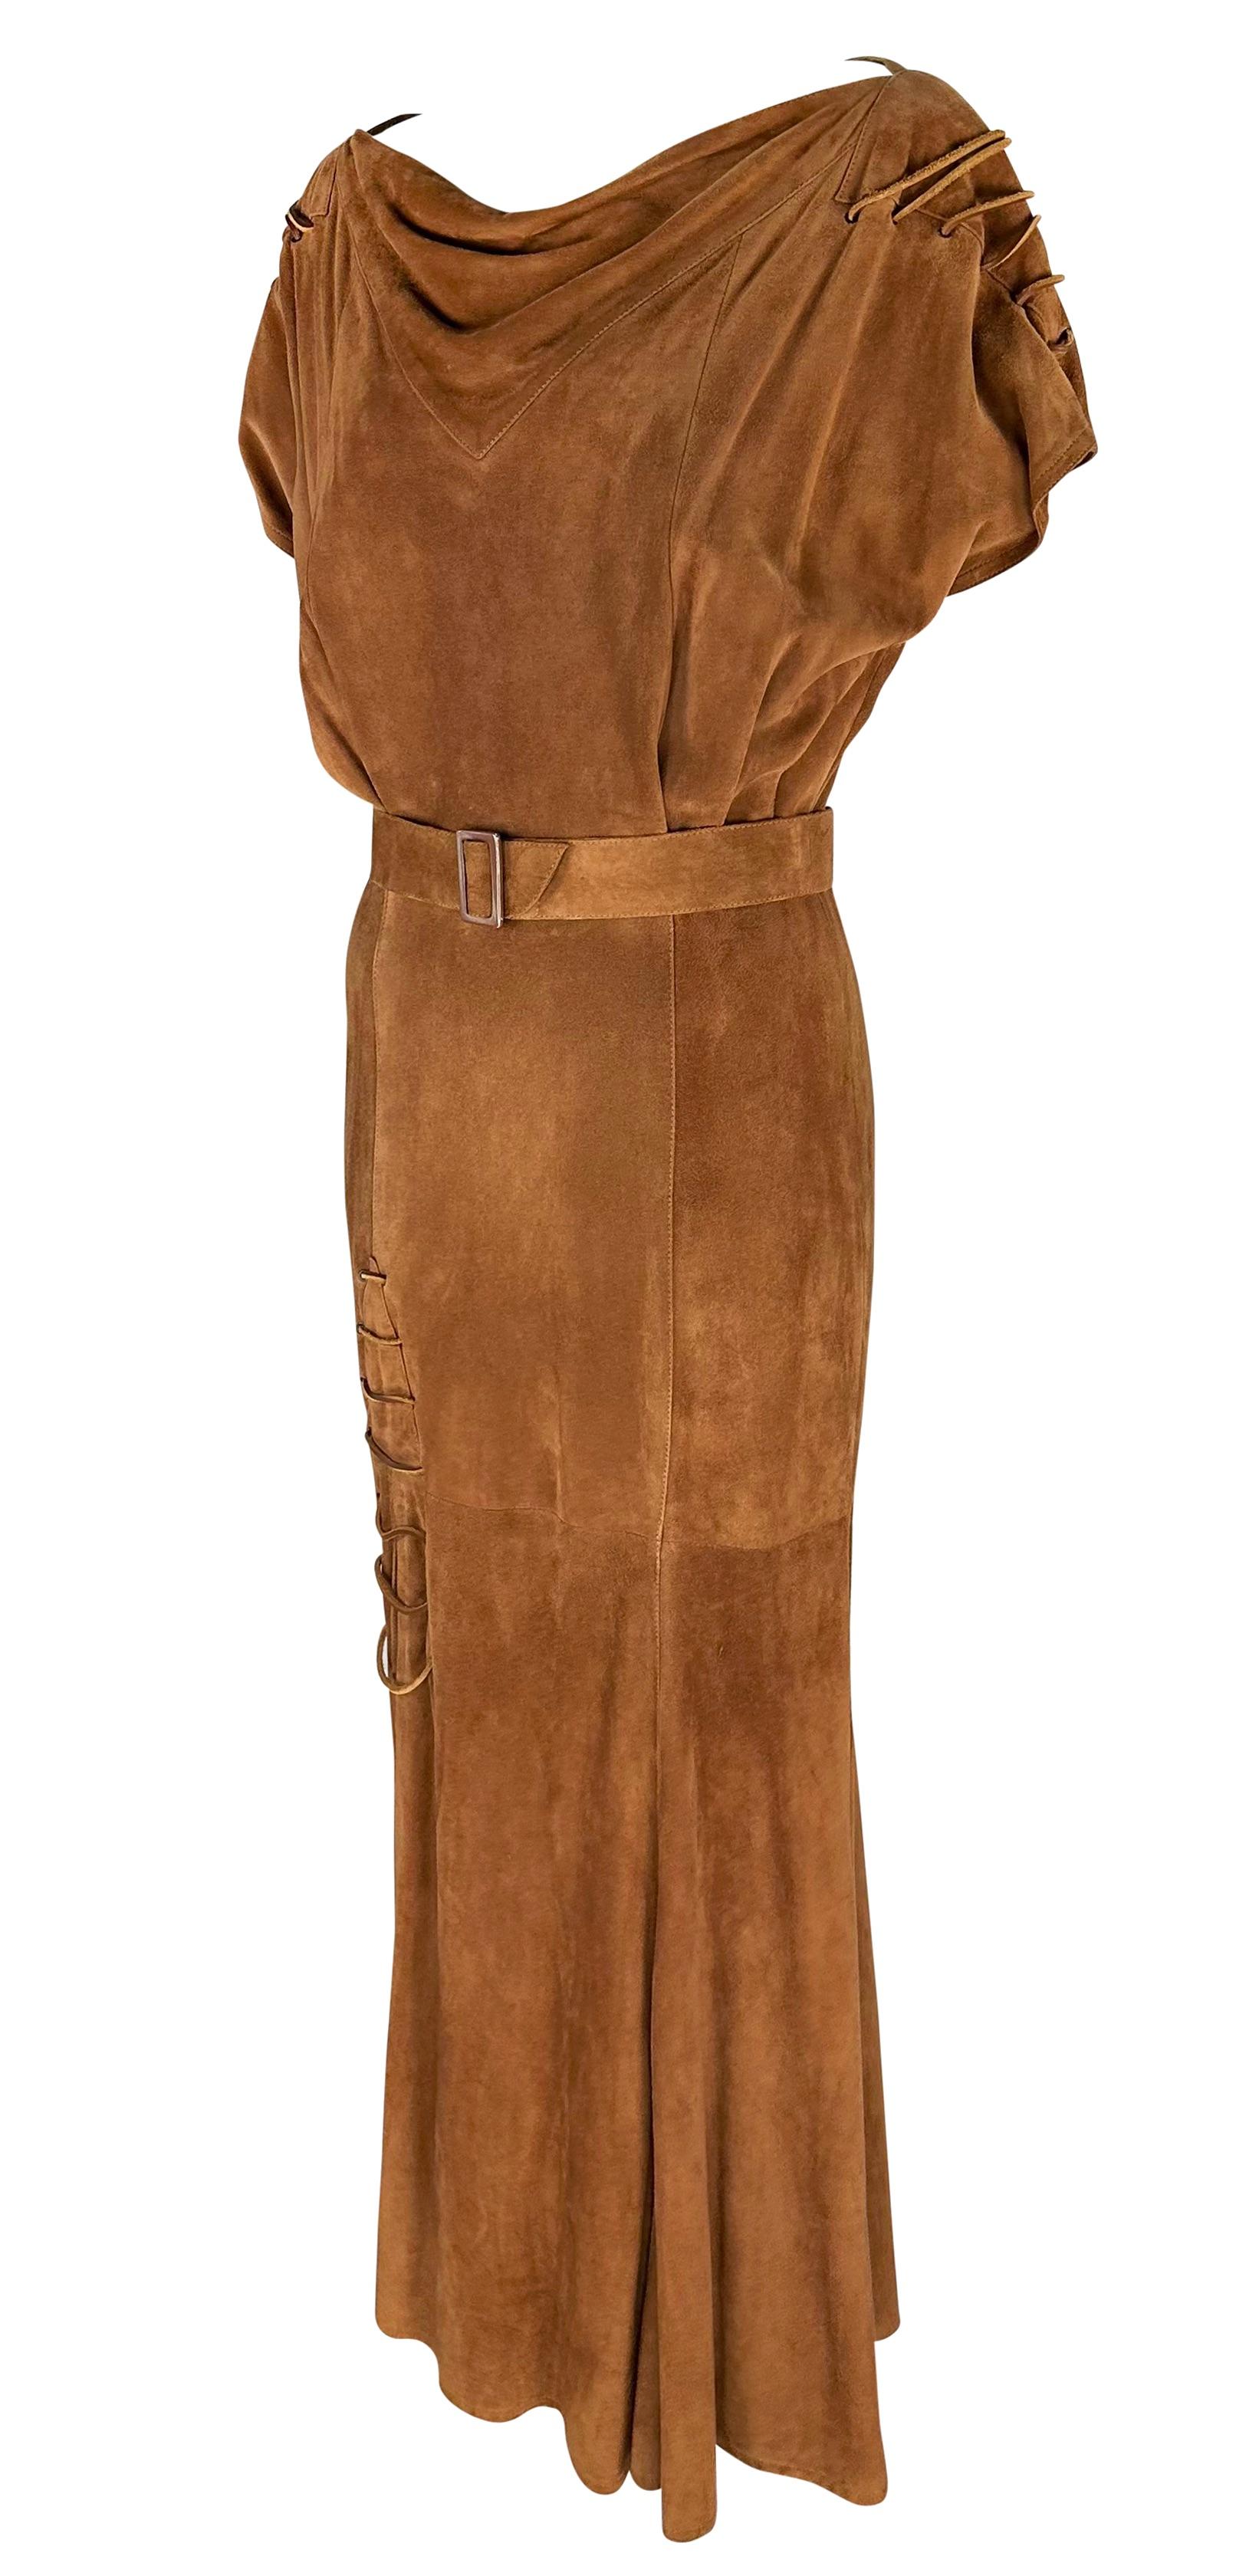 Thierry Mugler Anfang der 1980er Jahre Brown Suede Belted Lace-Up Flare Leather Maxi Dress im Angebot 2